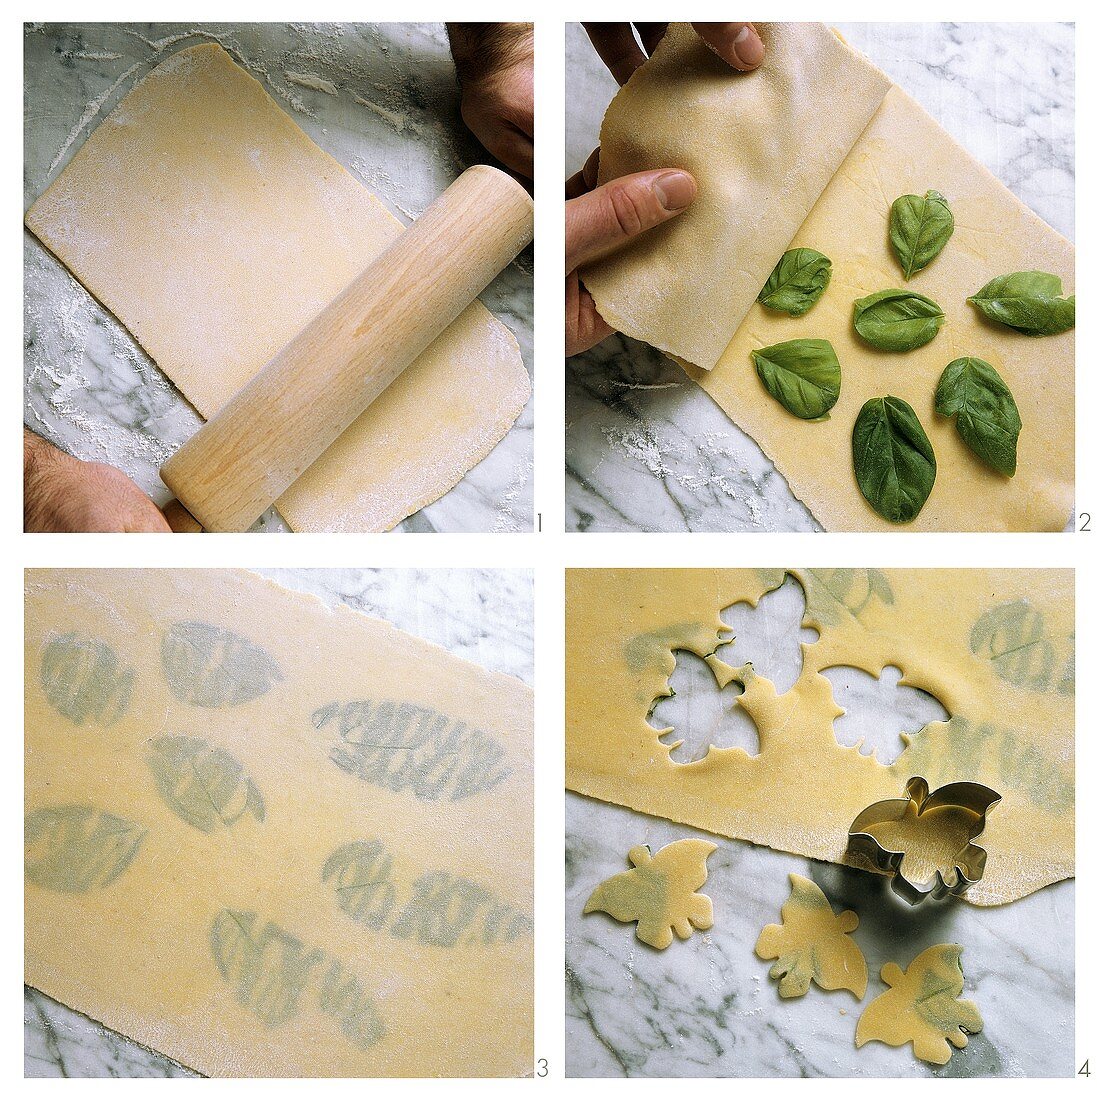 Making pasta dough with basil leaves